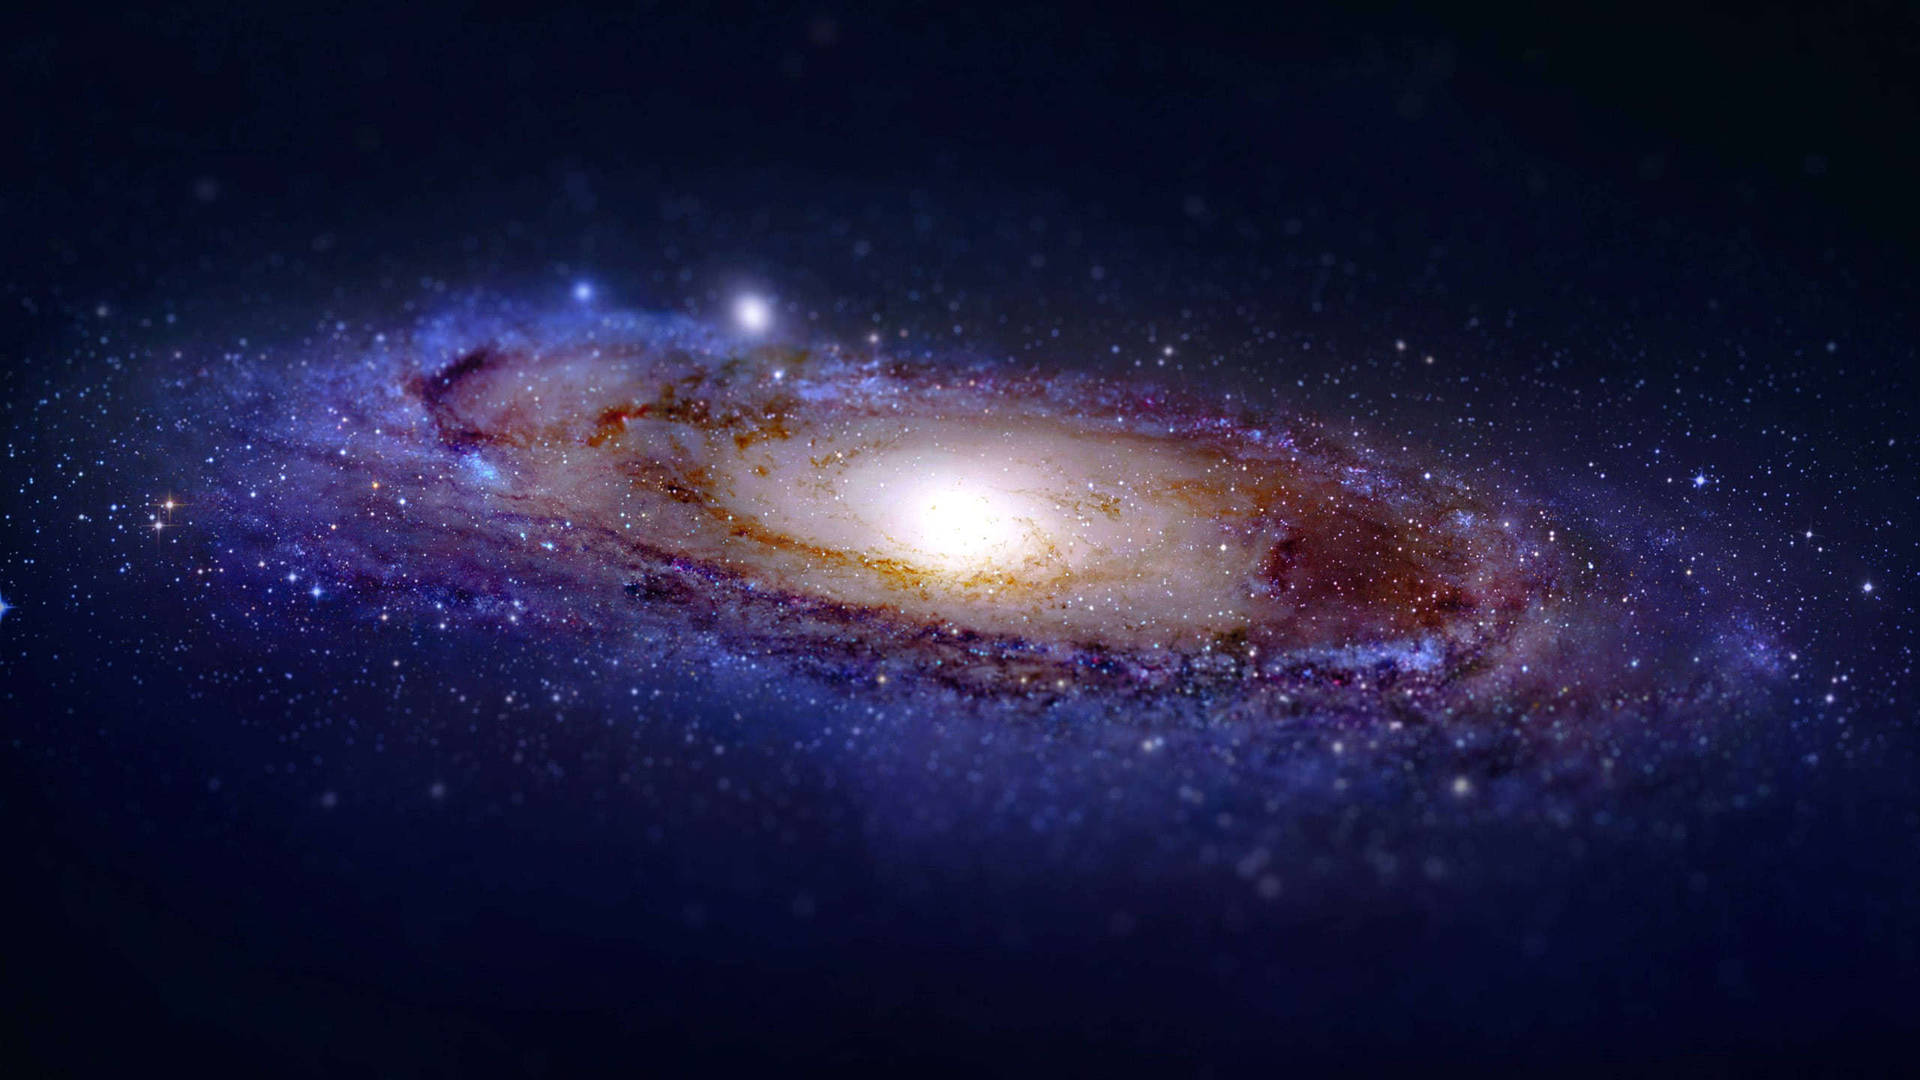 An Overview of the Milky Way Spiral Galaxy Wallpaper